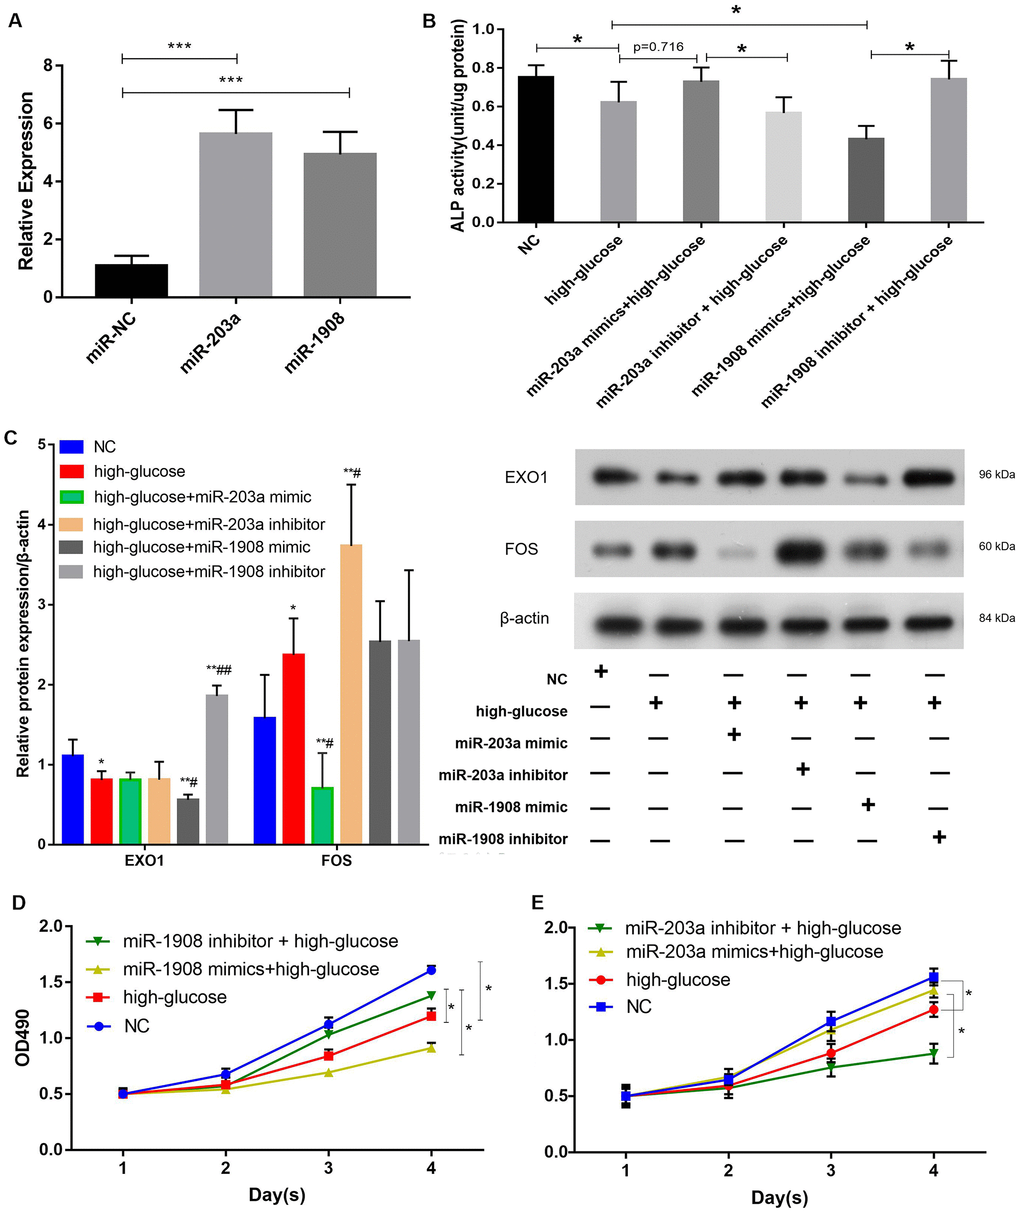 miR-1908 inhibits and miR-203a promotes the proliferation and osteogenic differentiation of BM-MSCs. (A) Transfection efficiency of miR-203a and miR-1908 in BM-MSCs. (B) ALP activity was measured in BM-MSCs treated with miRNA inhibitor or mimic (miR-203a and miR1908). (C) The expression of EXO1 and FOS were assessed in BM-MSCs transfected with miR-203a mimic, miR-203a inhibitor, miR-1908 mimic and miR-1908 inhibitor. (D, E) Proliferation of BM-MSCs following the evaluation of the overexpression and knockdown of microRNAs (miR-203a and miR1908).